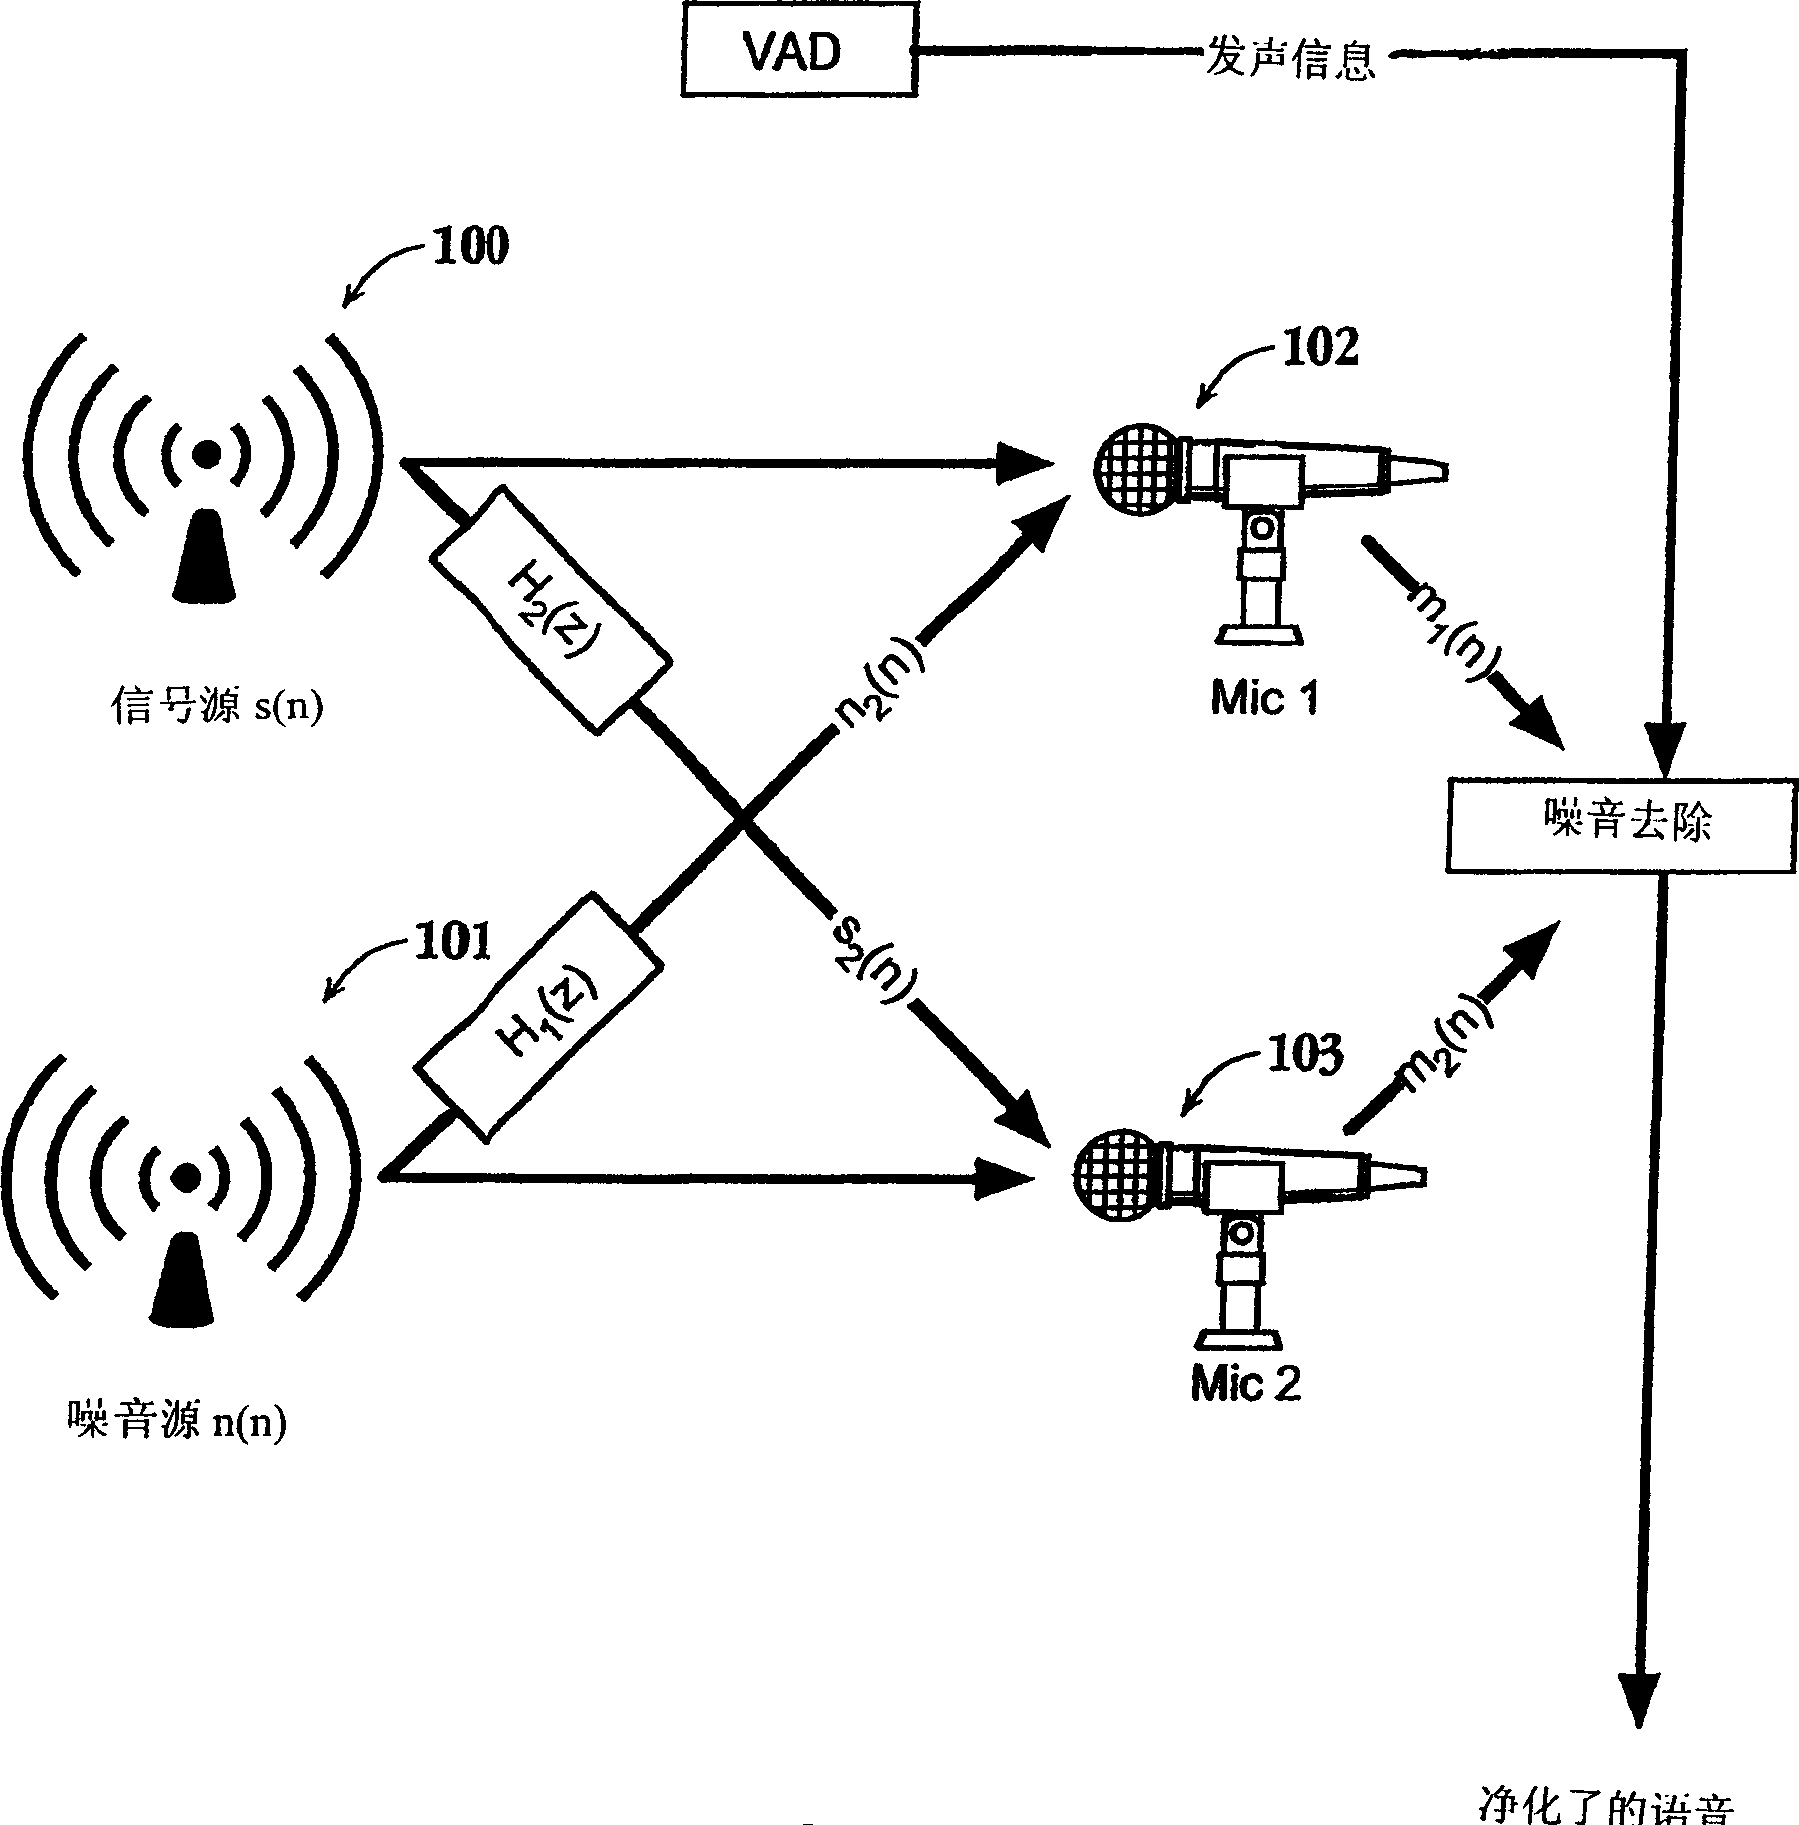 Method and apparatus for removing noise from electronic signals